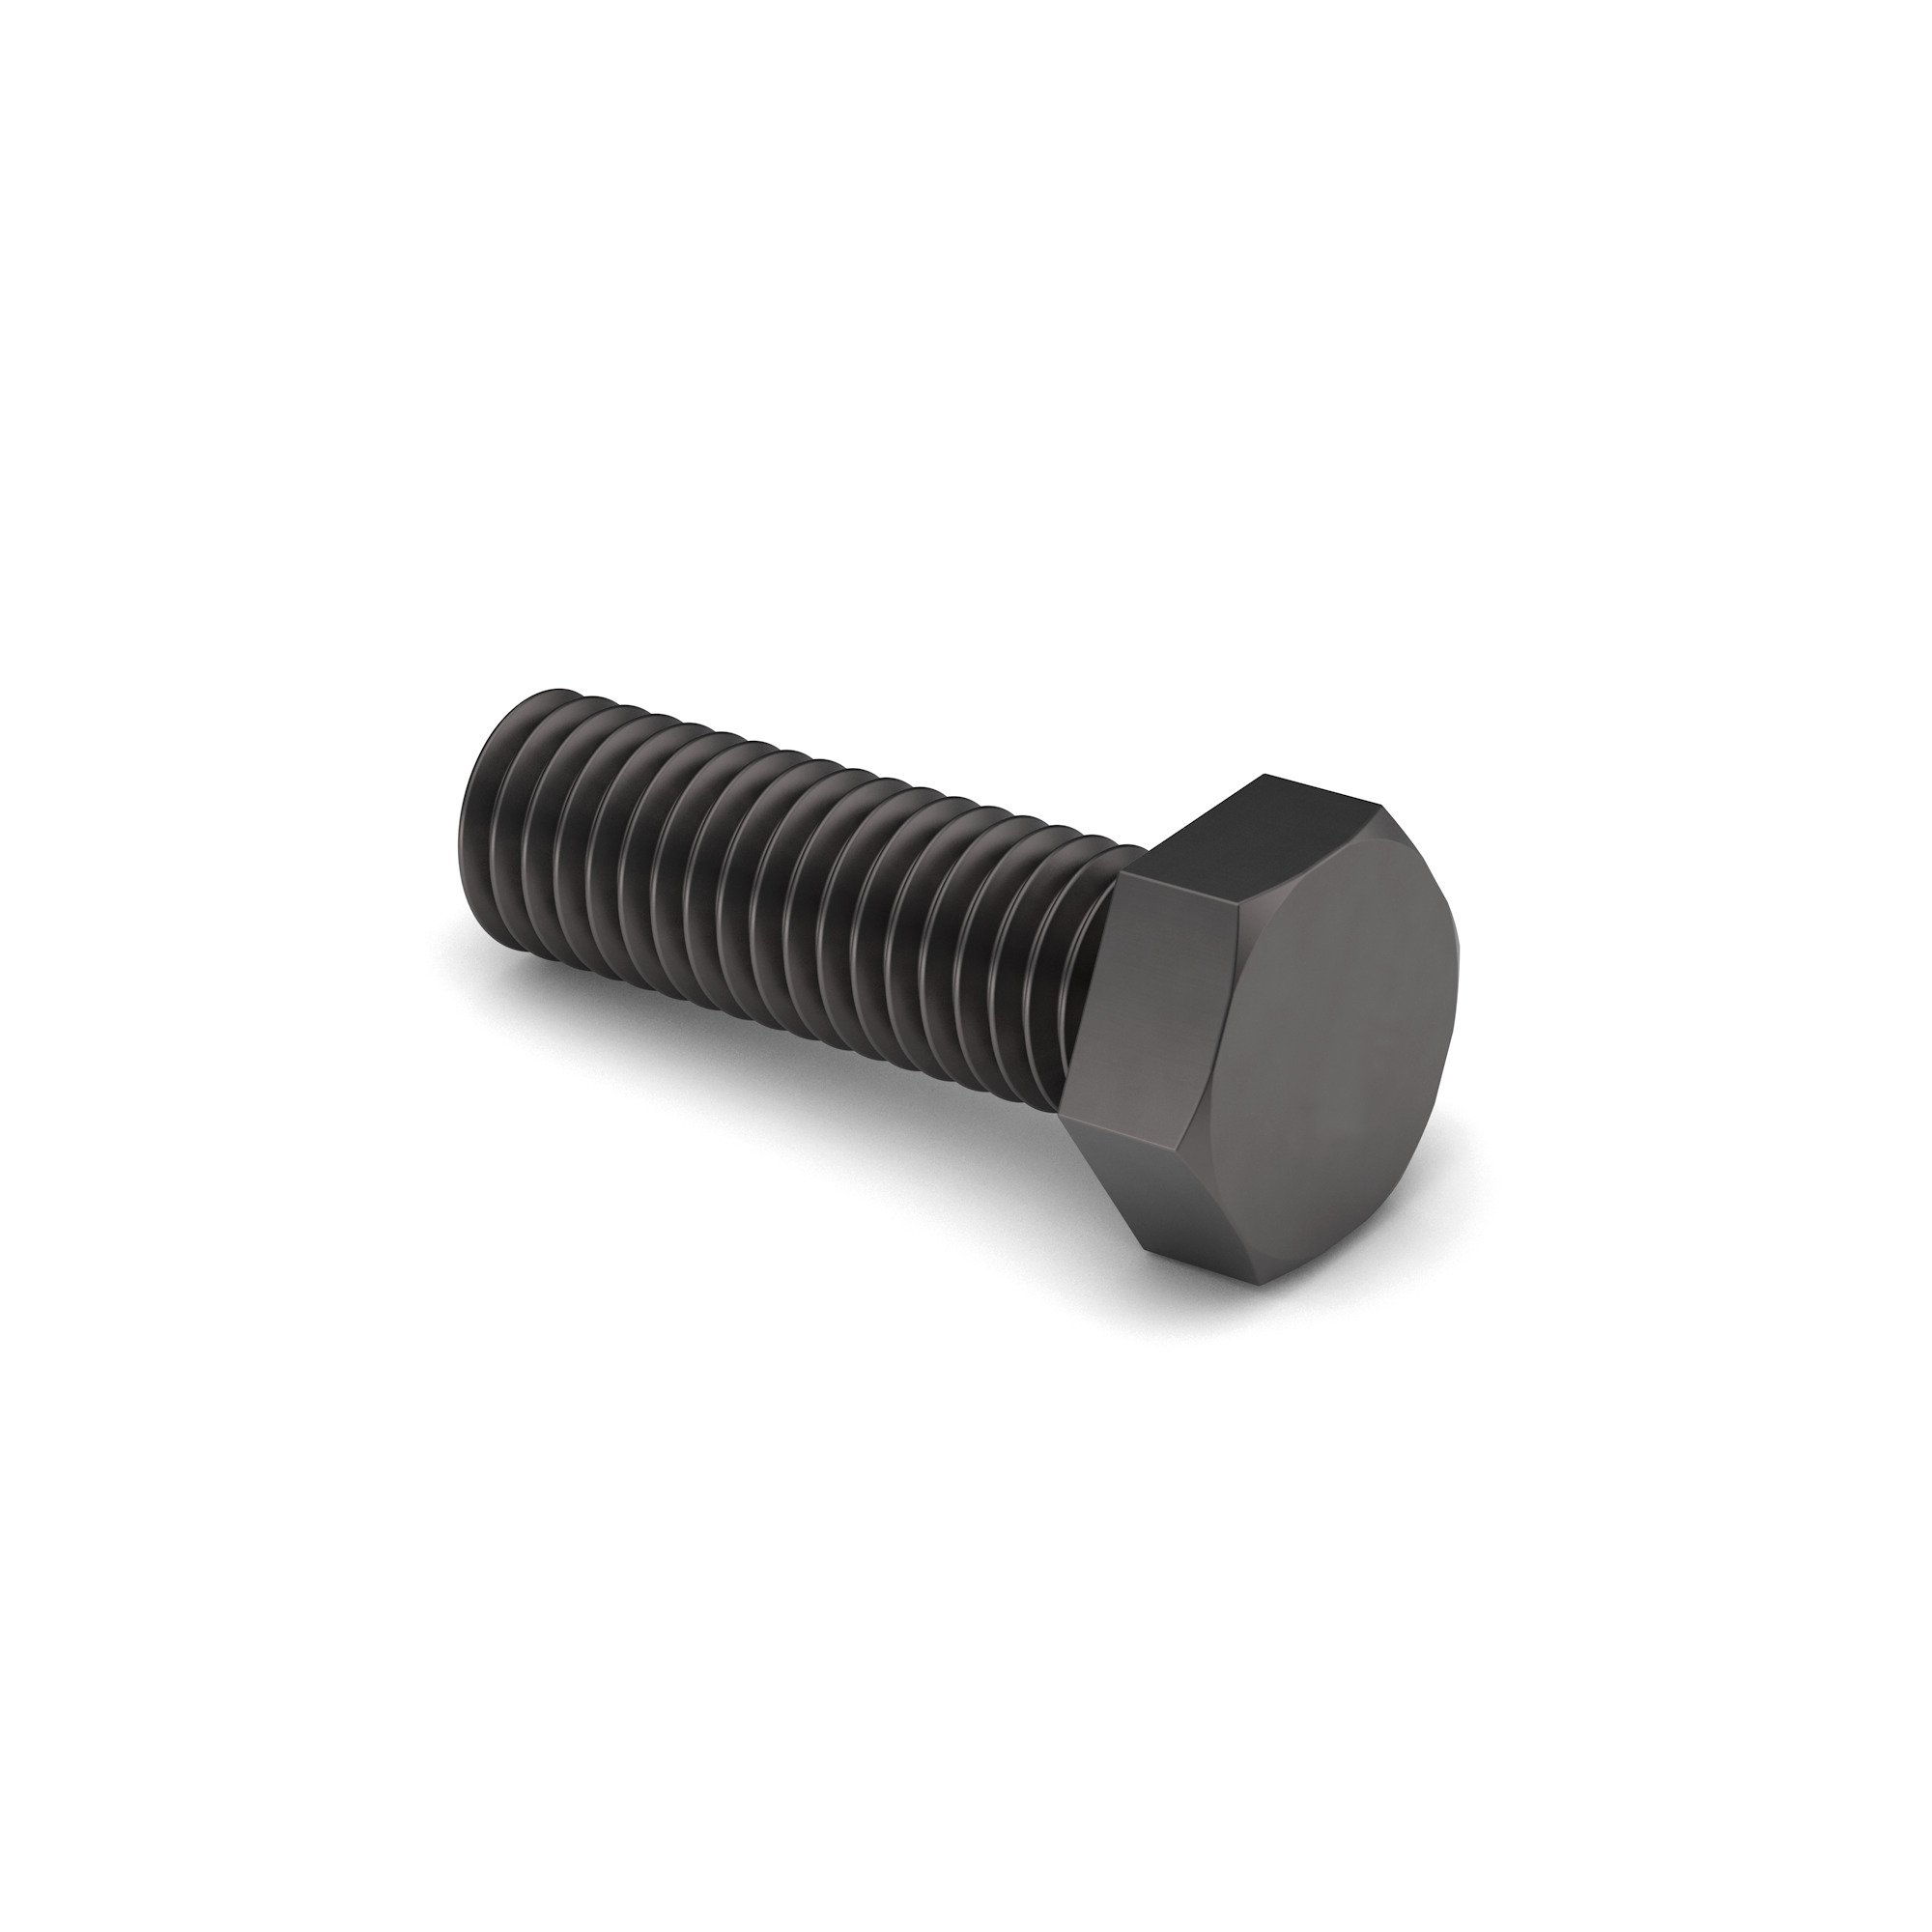 5/8-18x1 1/2 J429 GR 8 Alloy Steel Hex Hd Cap Screw Plain Finish (Mfg in N.America) with 1/8" hole drilled/countersunk through flats